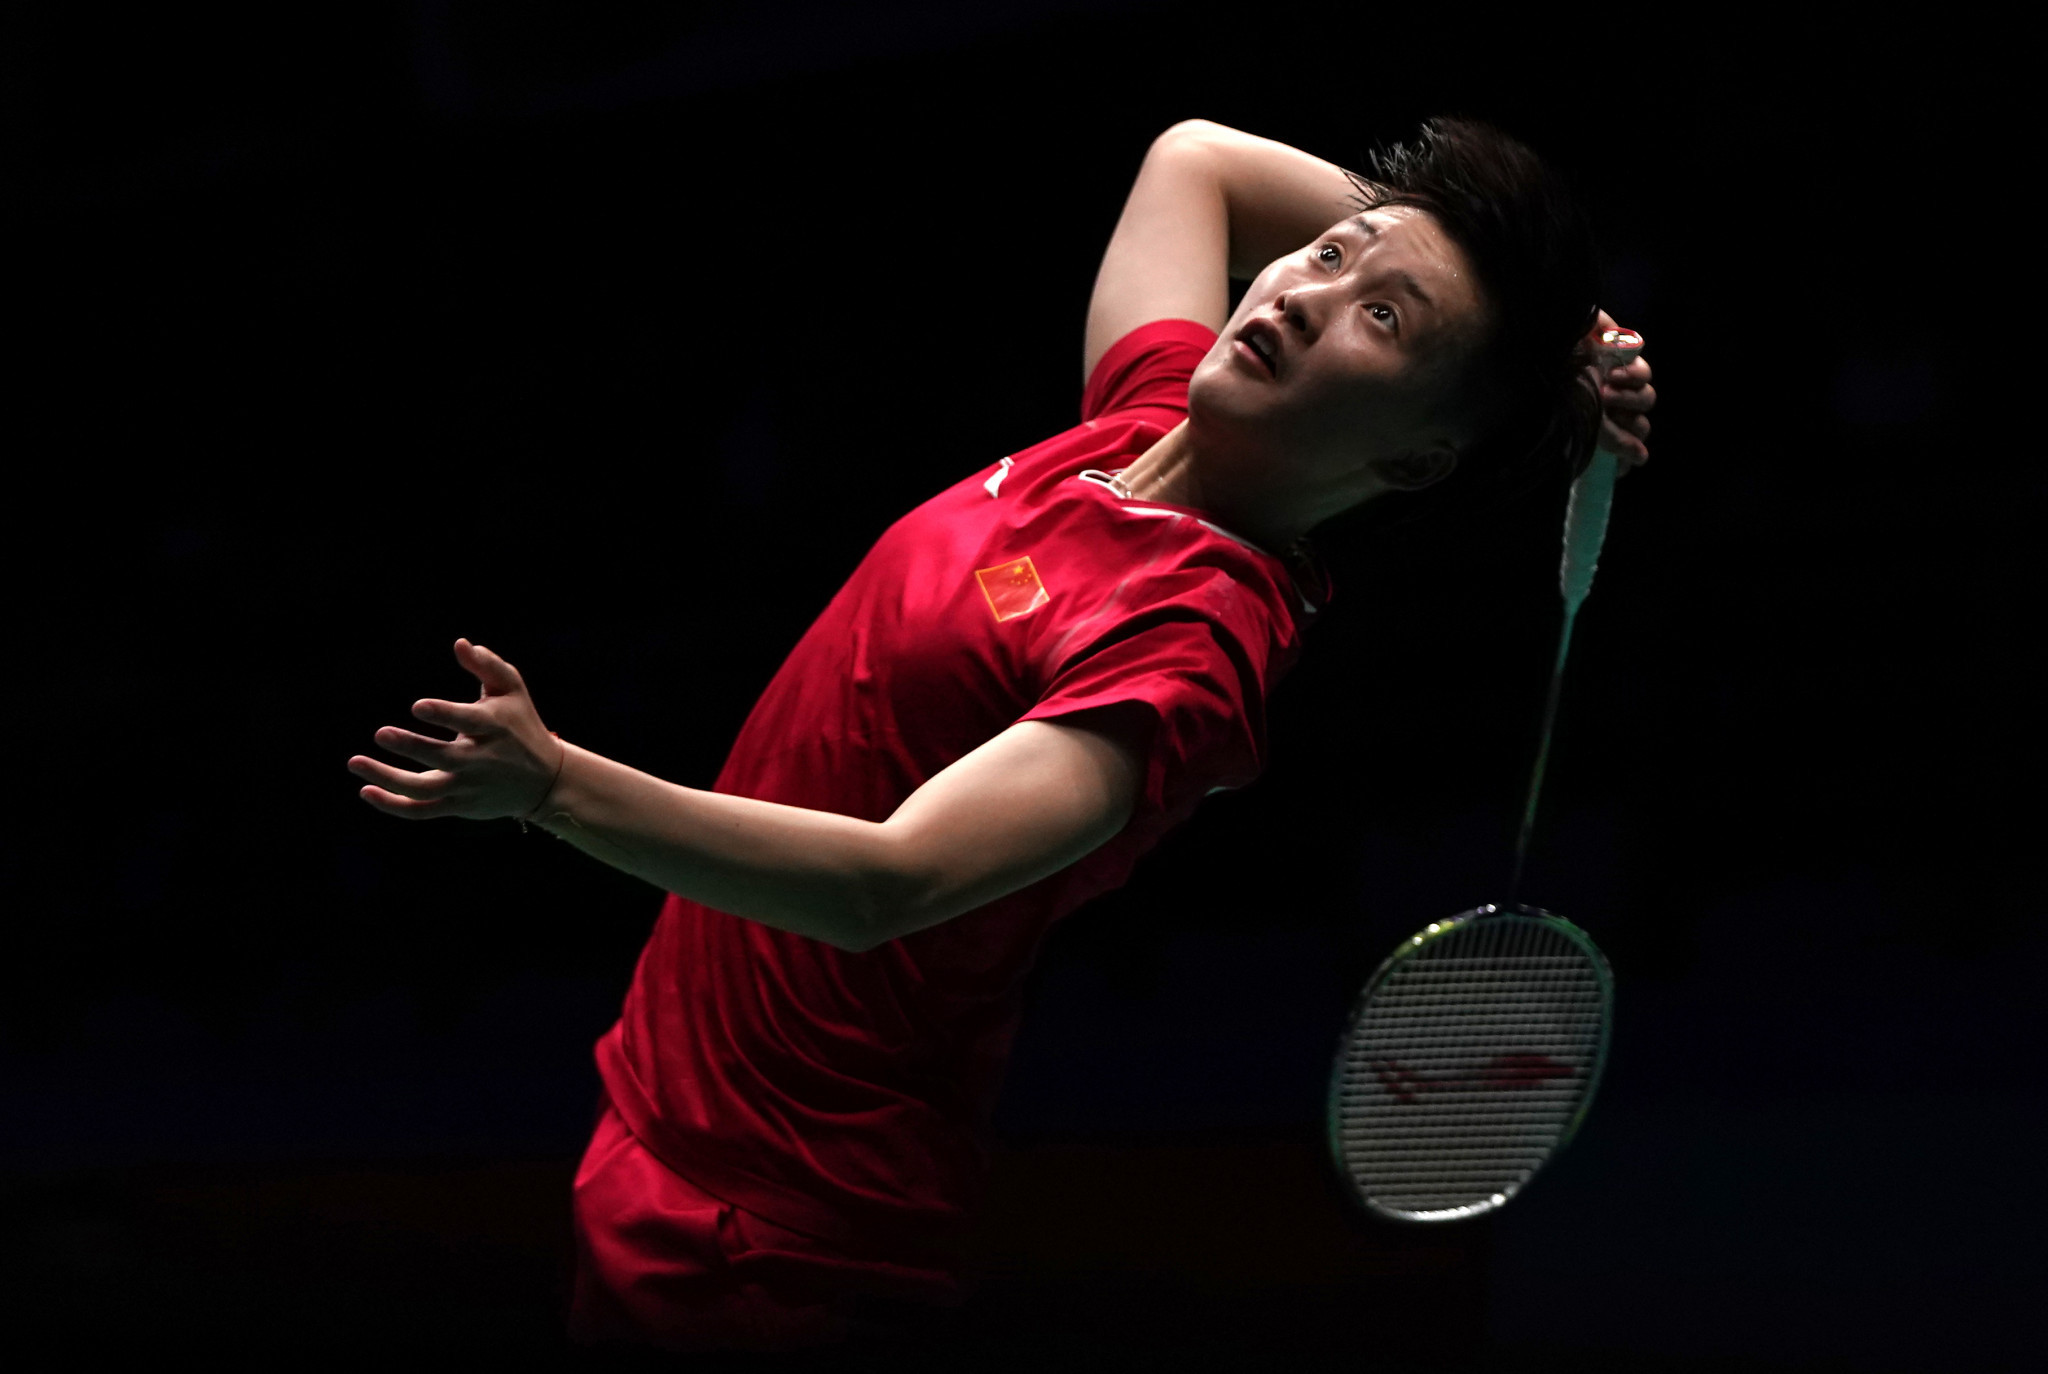 China's Chen Yufei is the women's singles top seed ©Getty Images